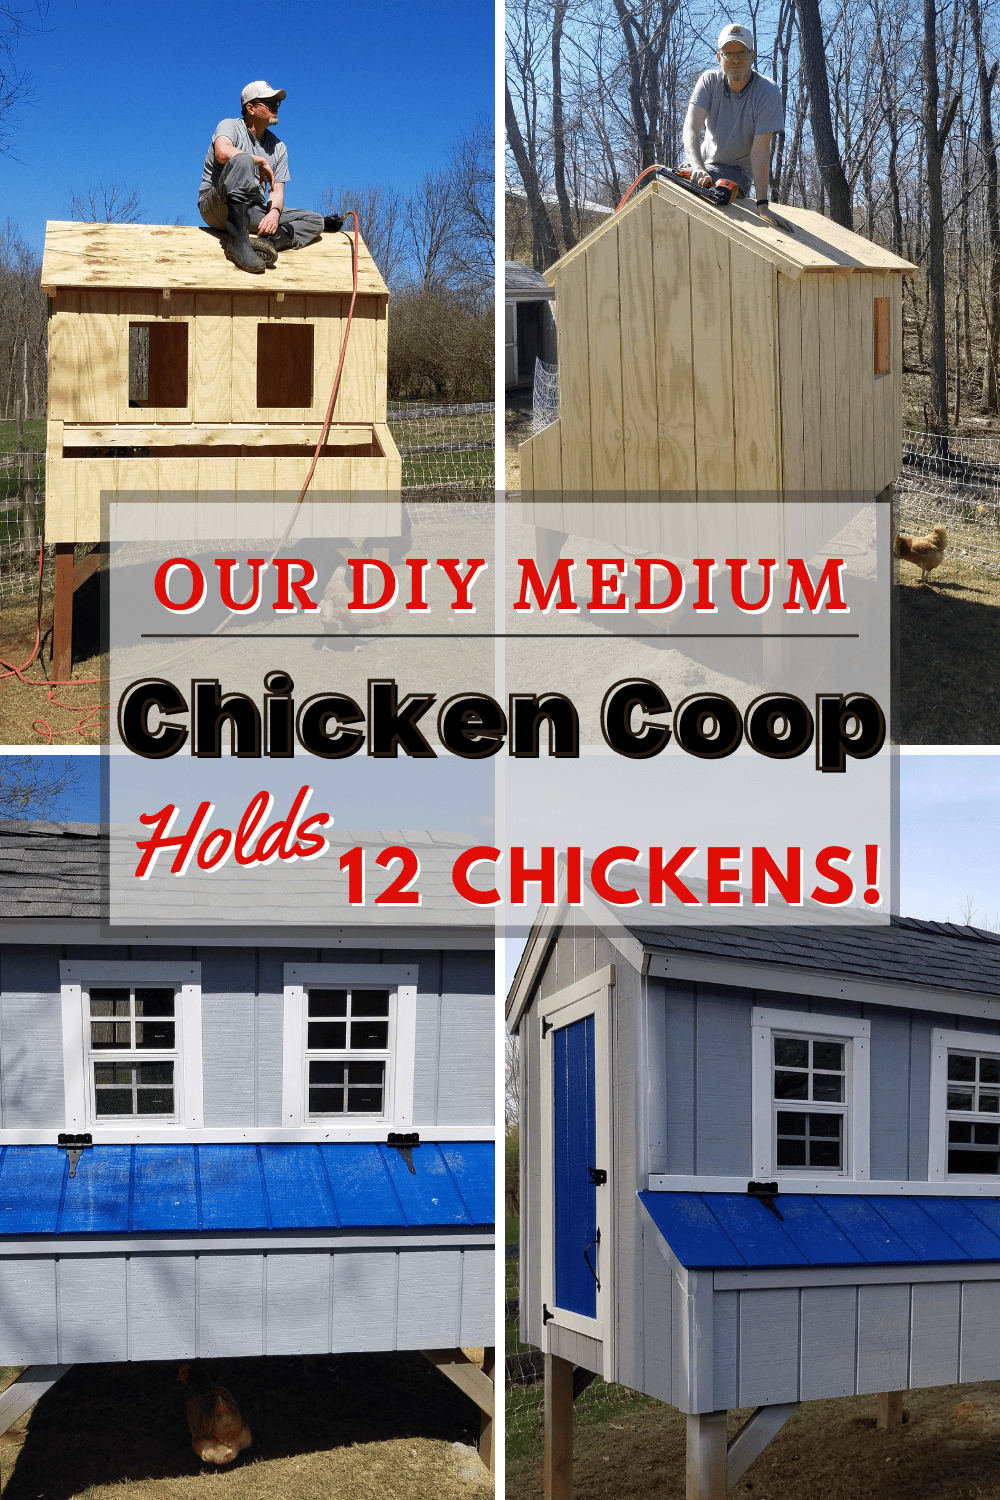 Our DIY Medium Chicken Coop that holds 12 chickens Pinterest Pin with 4 photos, 2 on top during build and 2 post build pics